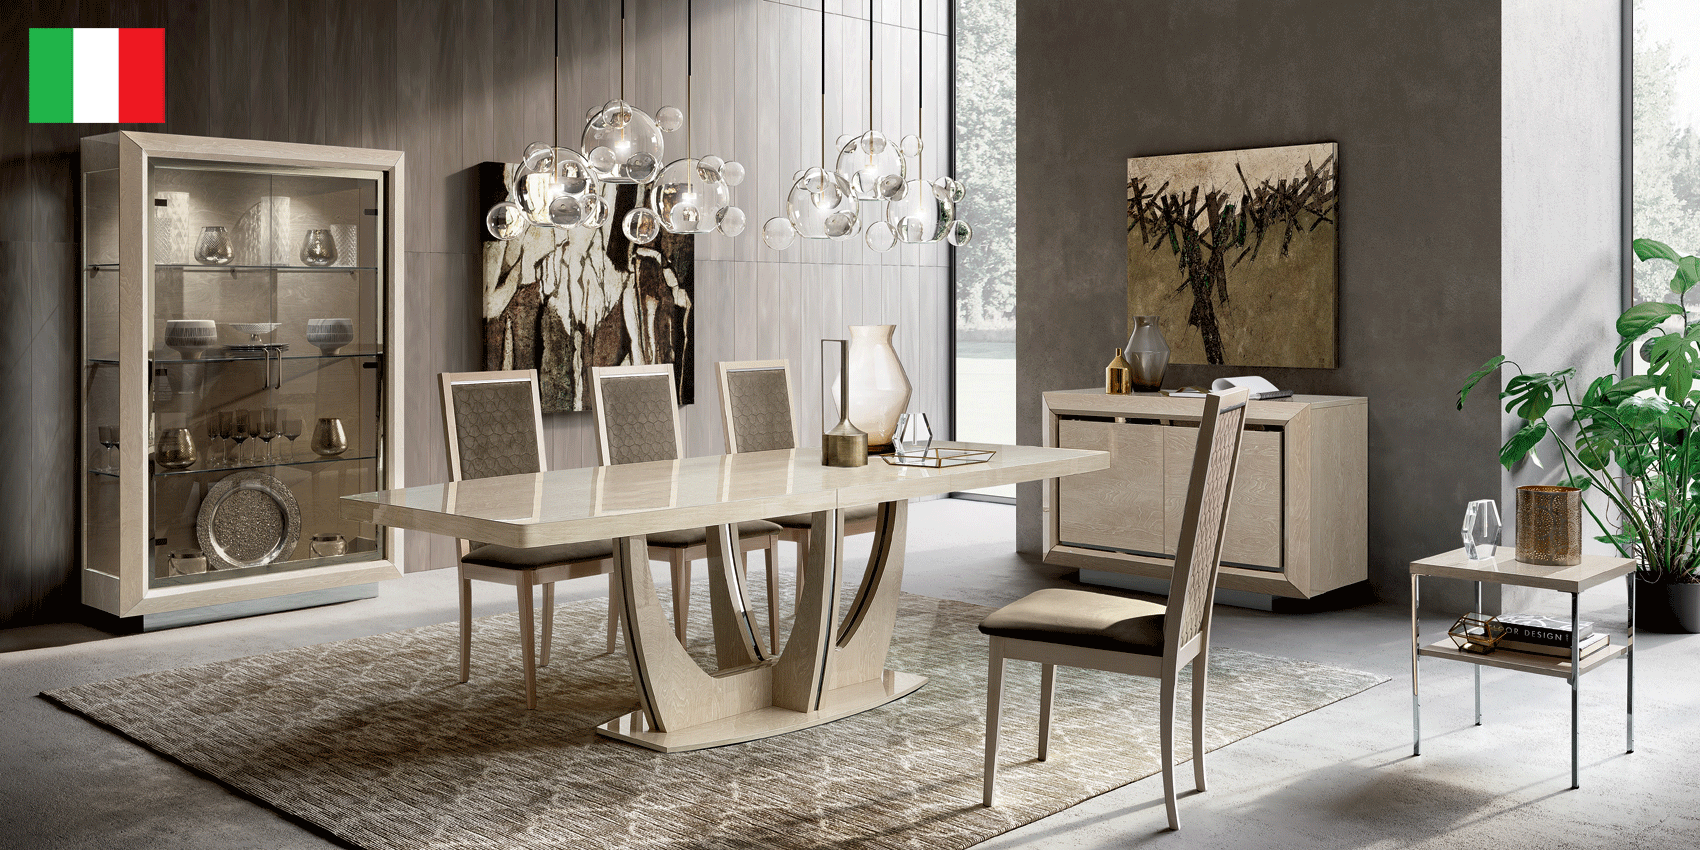 Brands Camel Classic Collection, Italy Elite Dining Ivory with Ambra “Rombi” Chairs